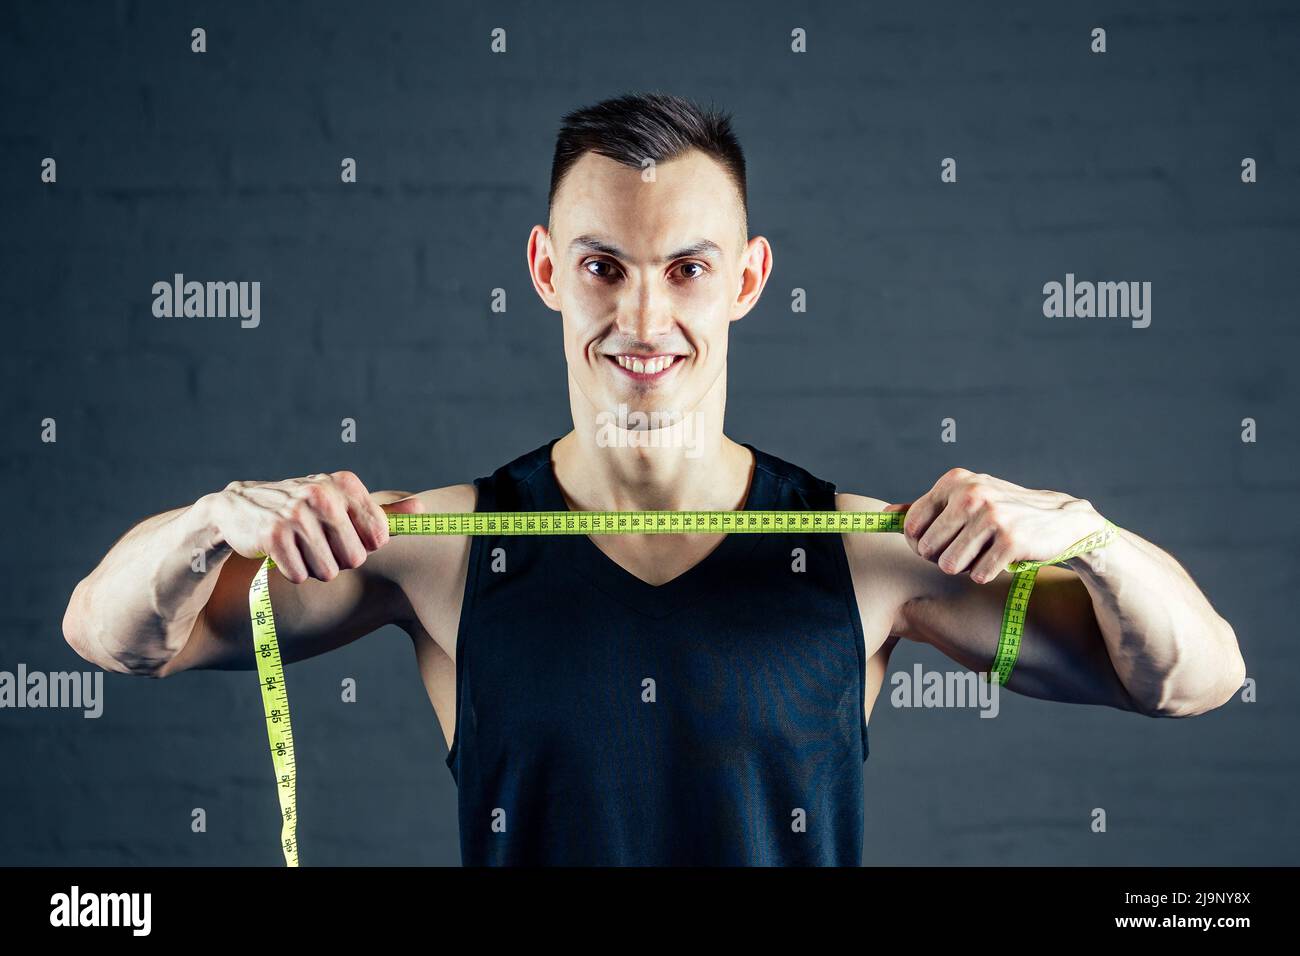 A young man measures his hand with a measuring tape in the gym on a dark background Stock Photo